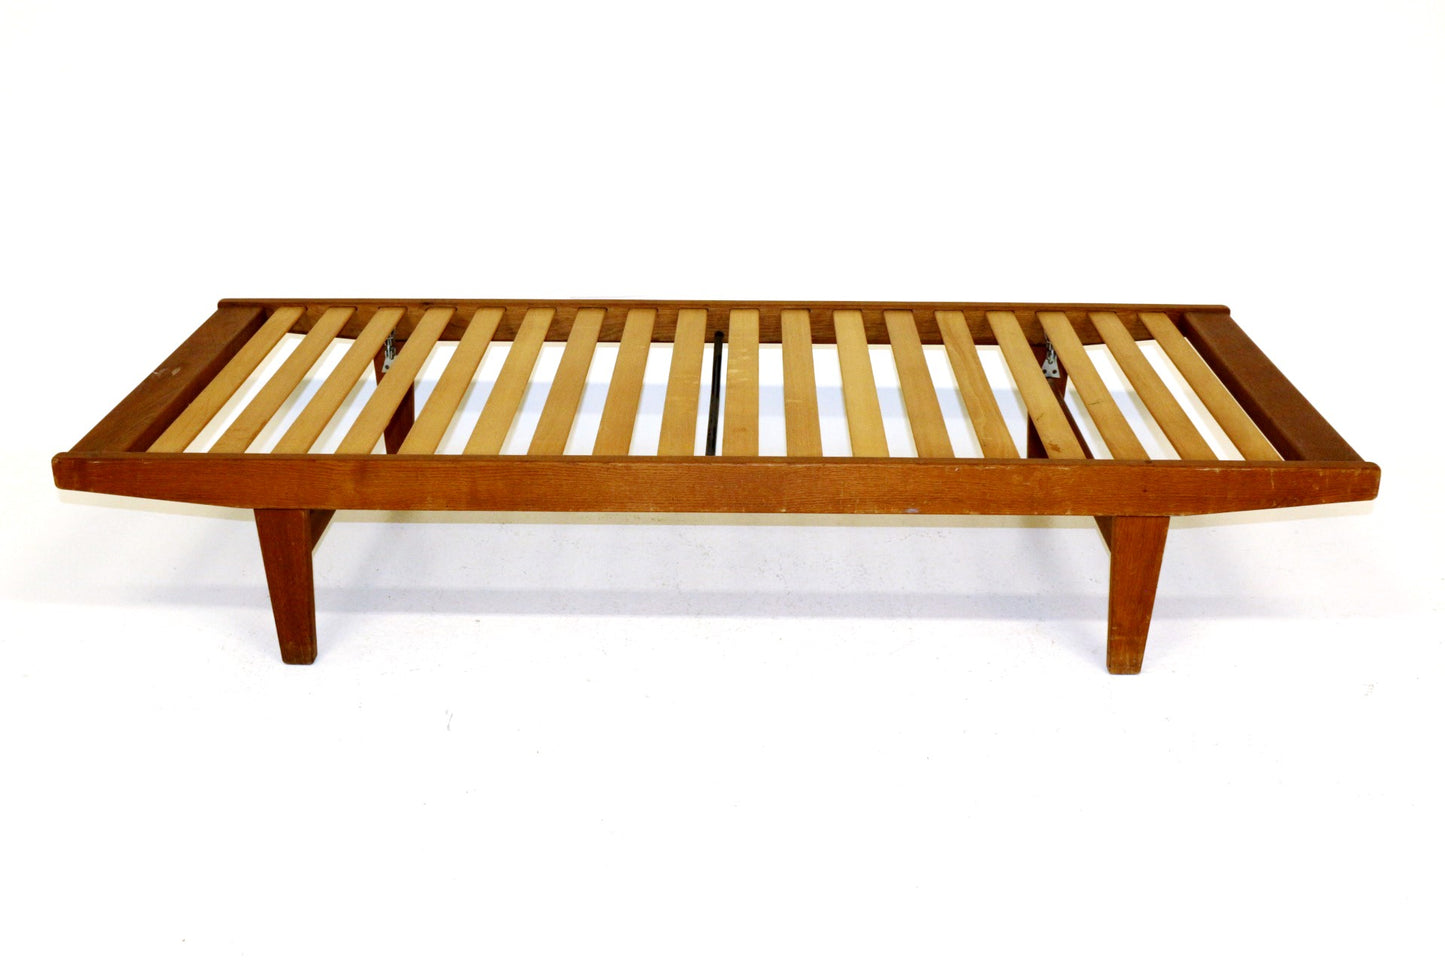 Daybed Poul Volther design danese vintage anni 50 [sw16559]